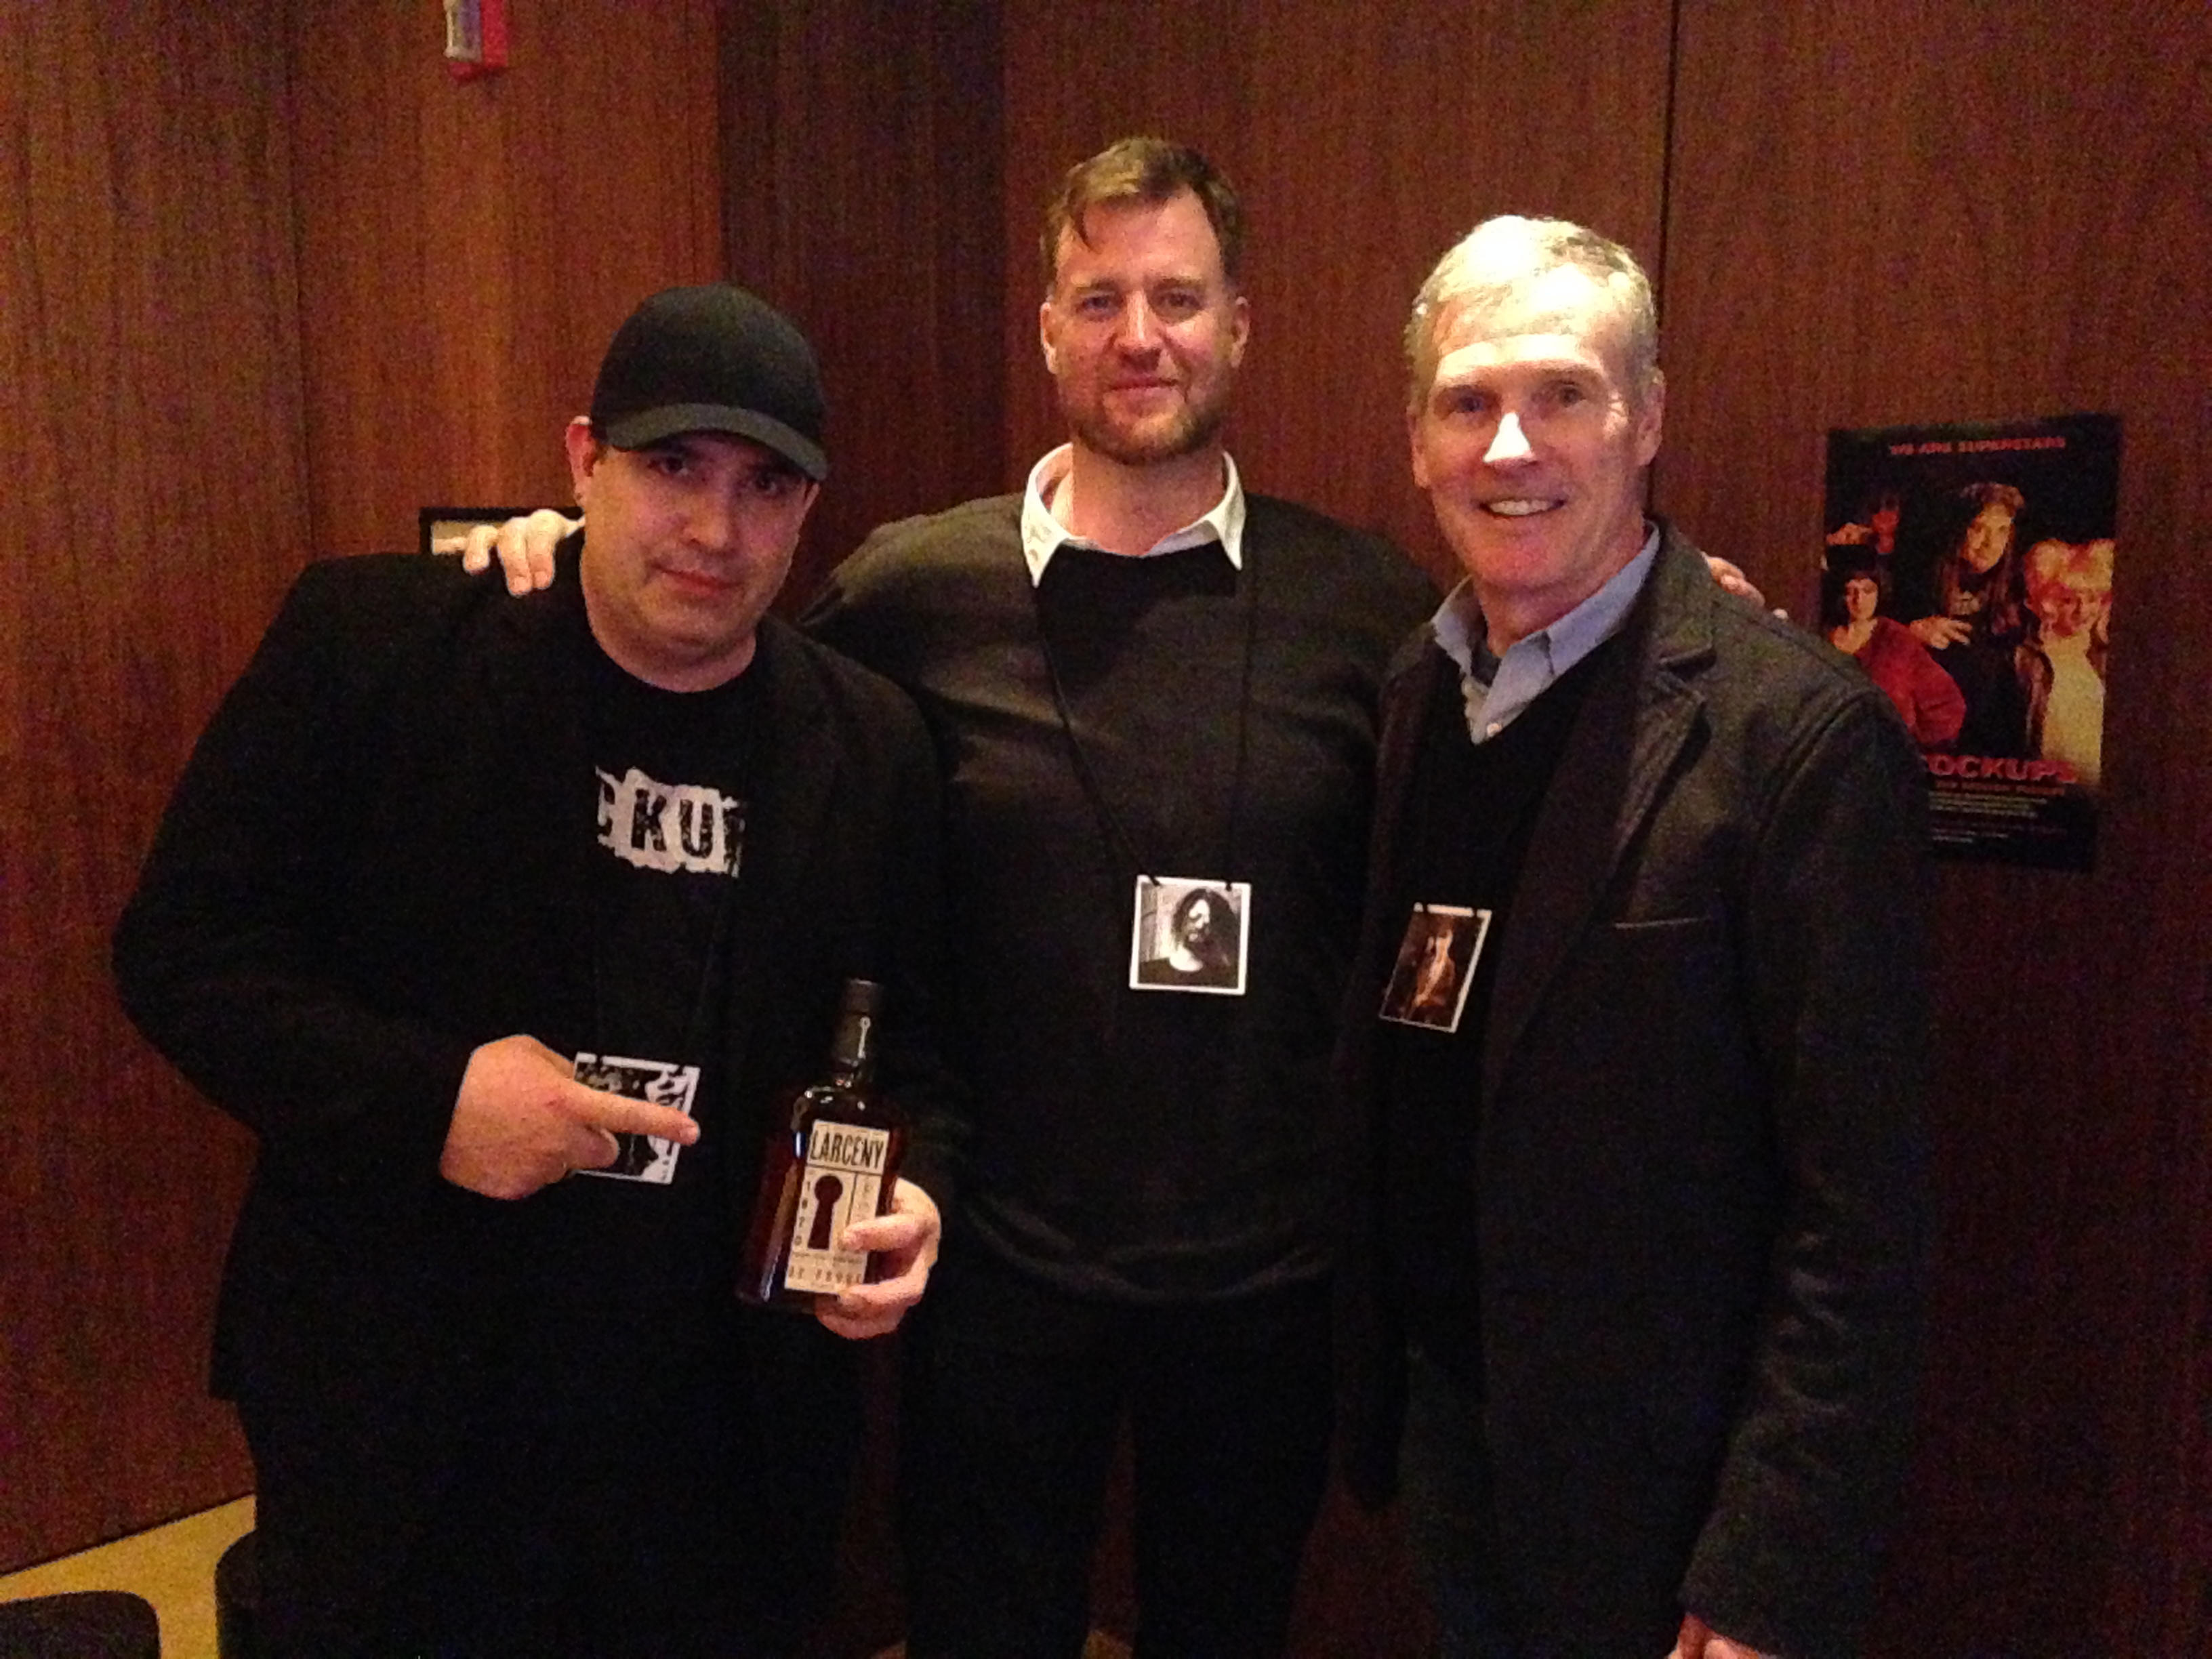 Special screening event for The Cockups (2015) Director Gerard Jamroz with actors Robert Tobin and RJ Coleman